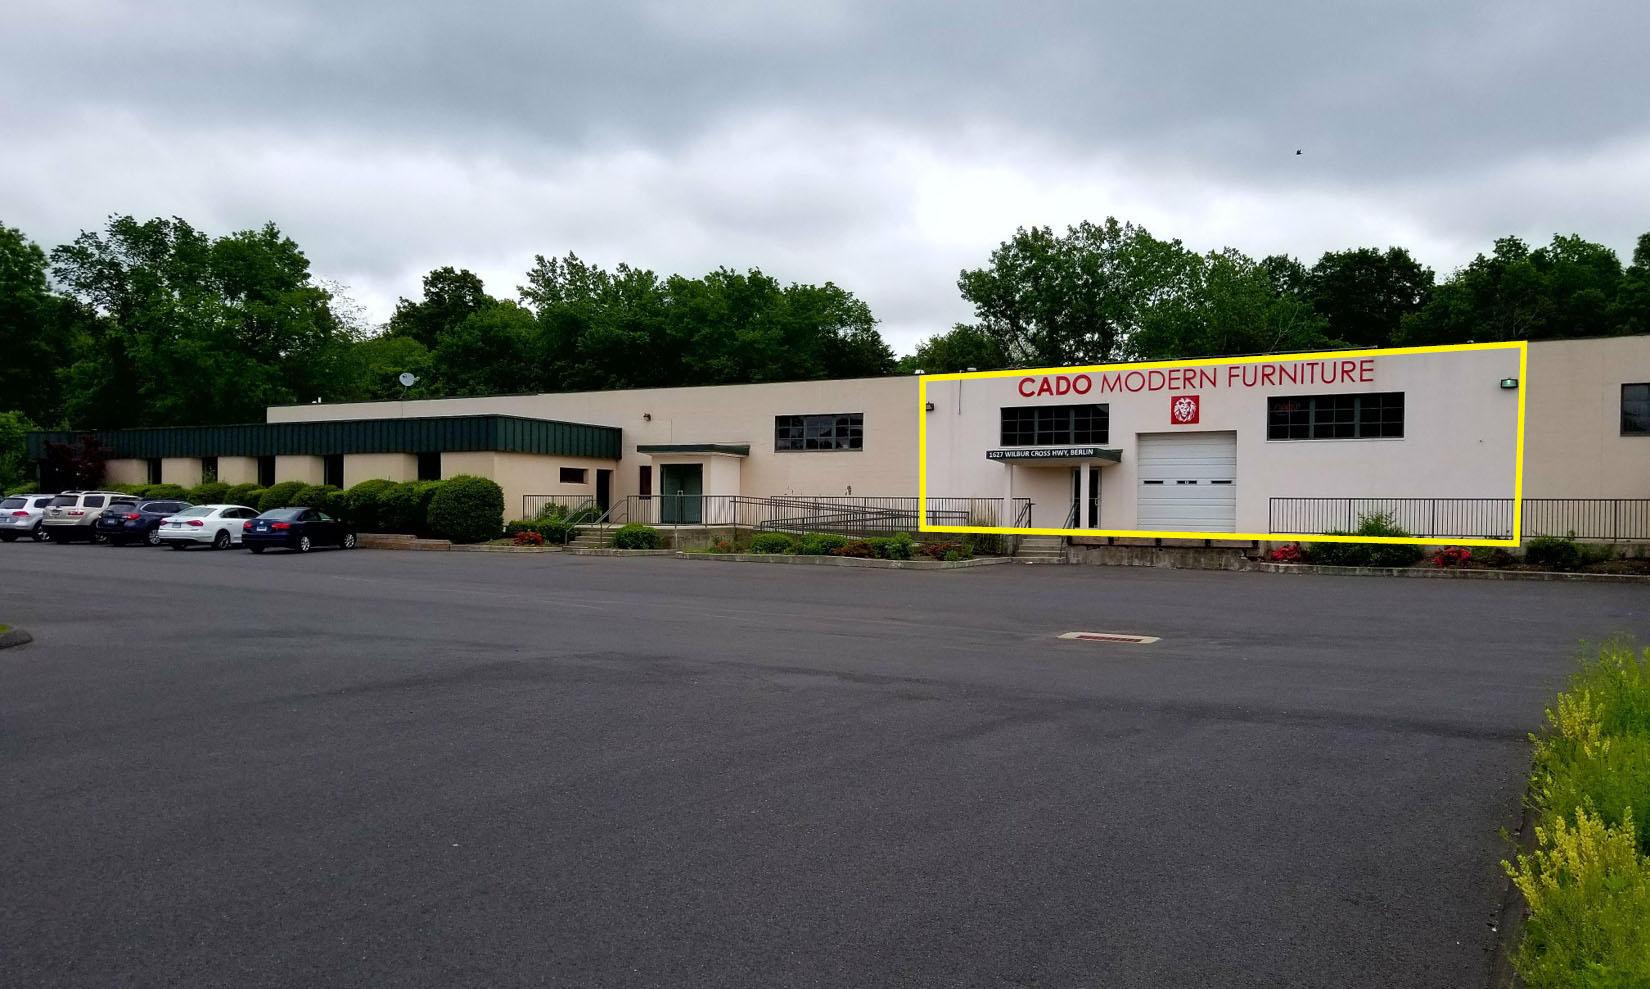 O,R&L Commercial Leases 6,710 SF Warehouse / Flex Space on Berlin Turnpike, Berlin, CT